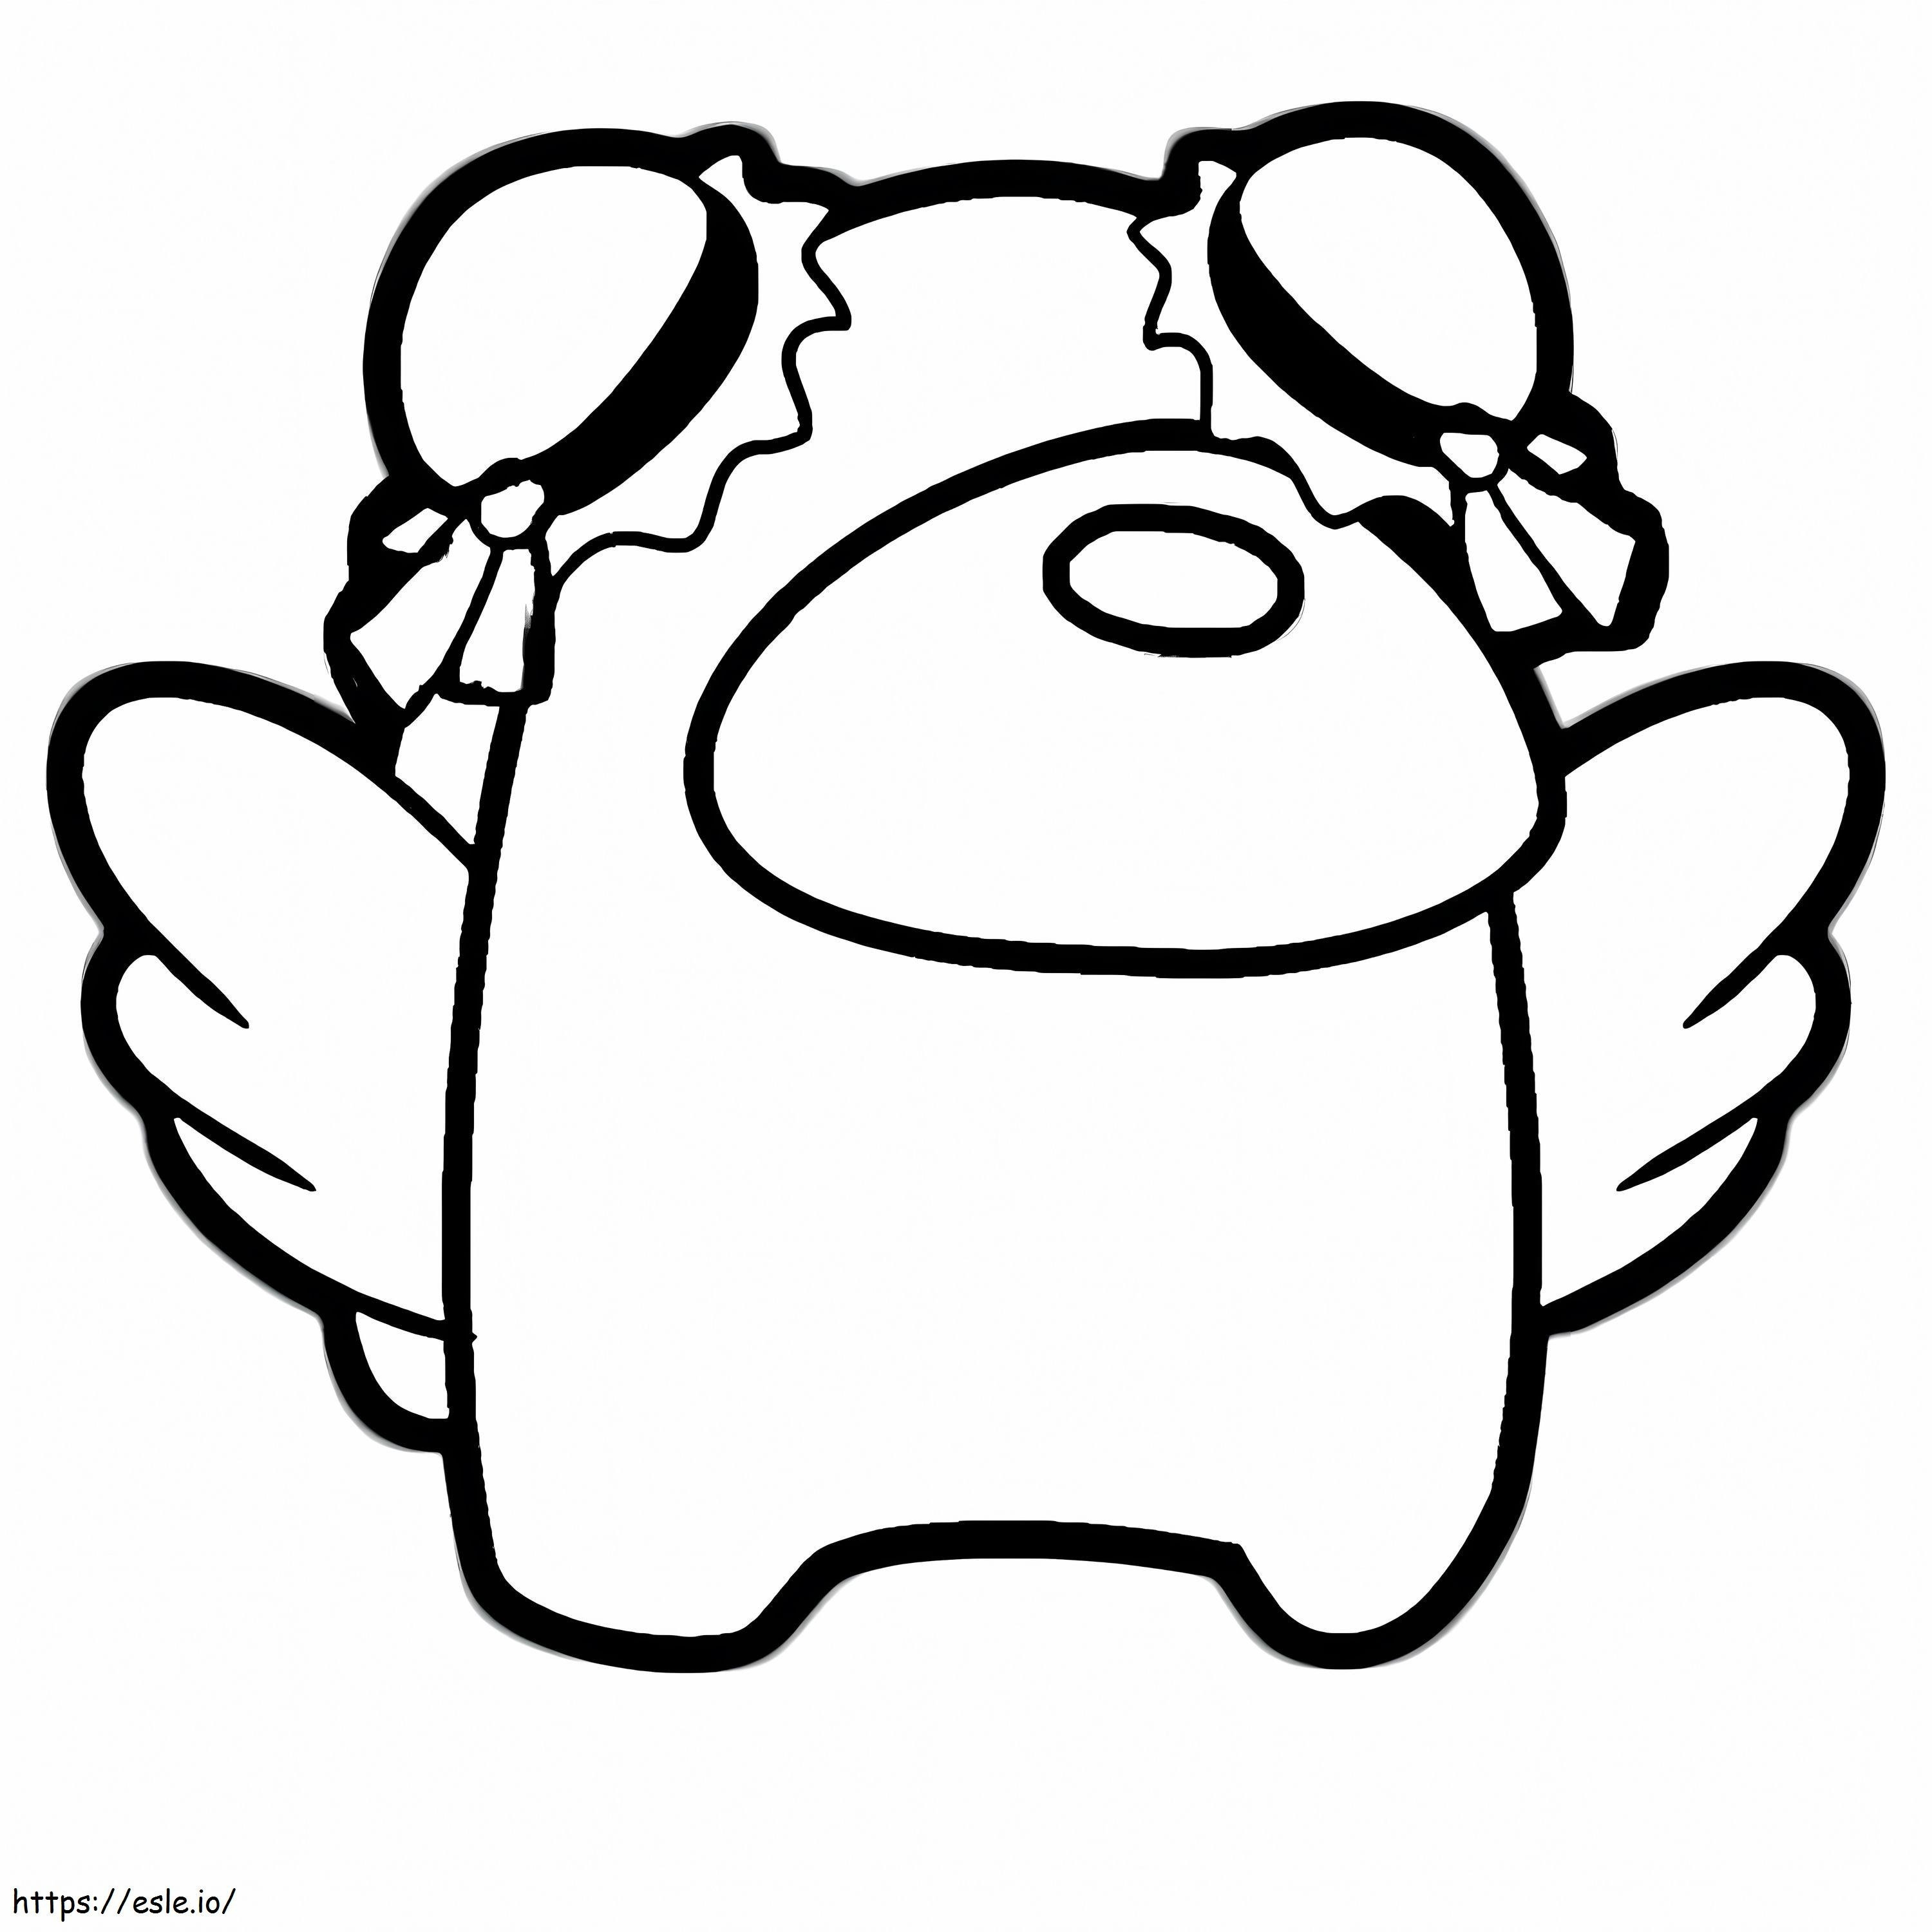 Among Us Cutie With Wings coloring page